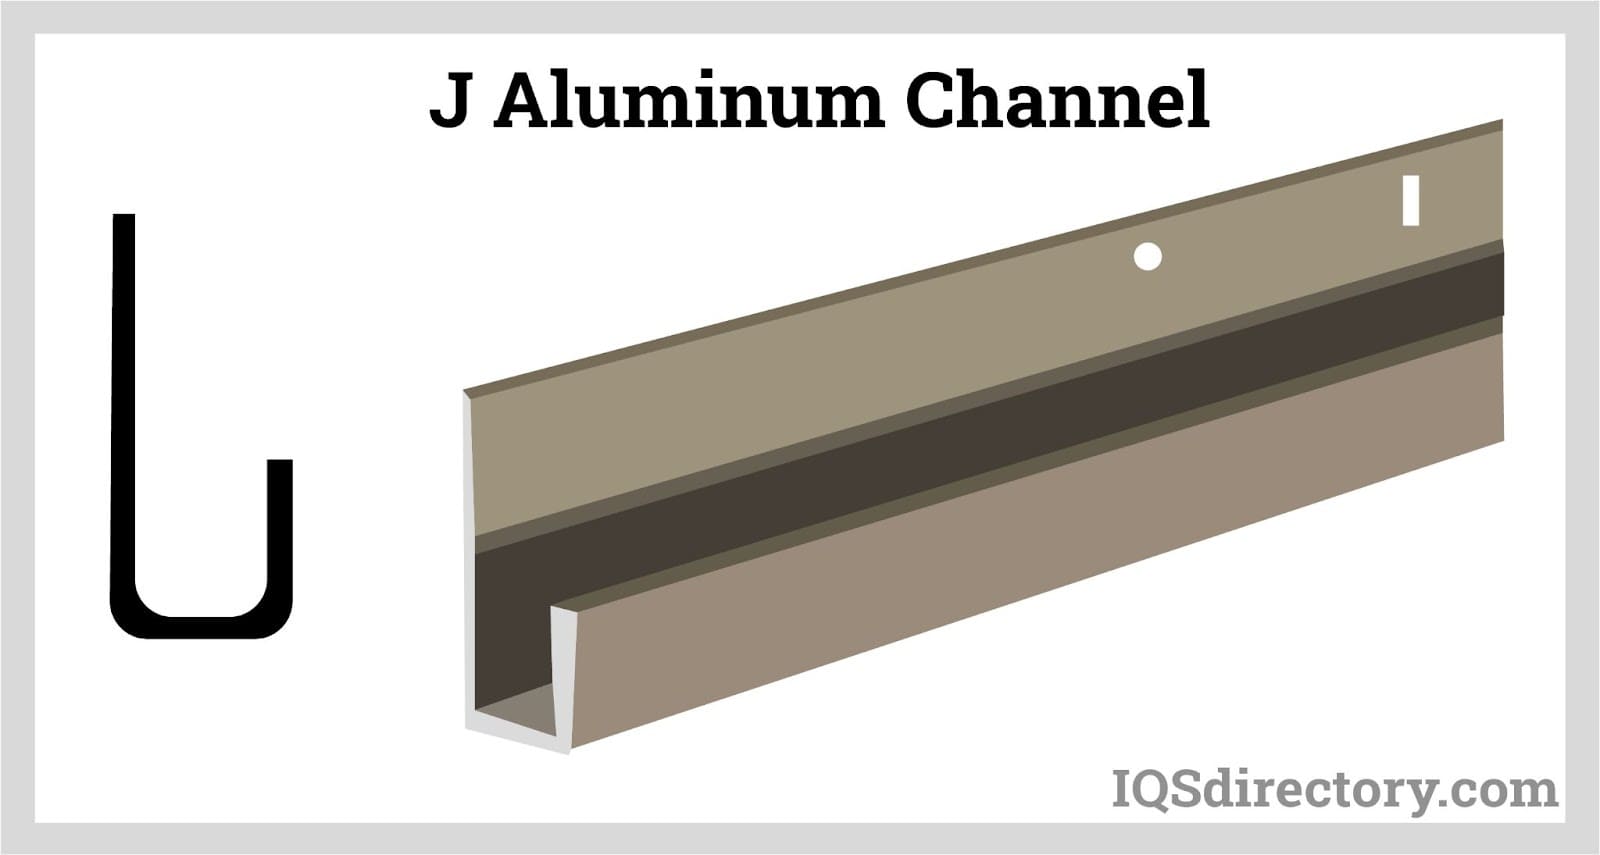 Cable channels made of aluminium, aluminium cable channels